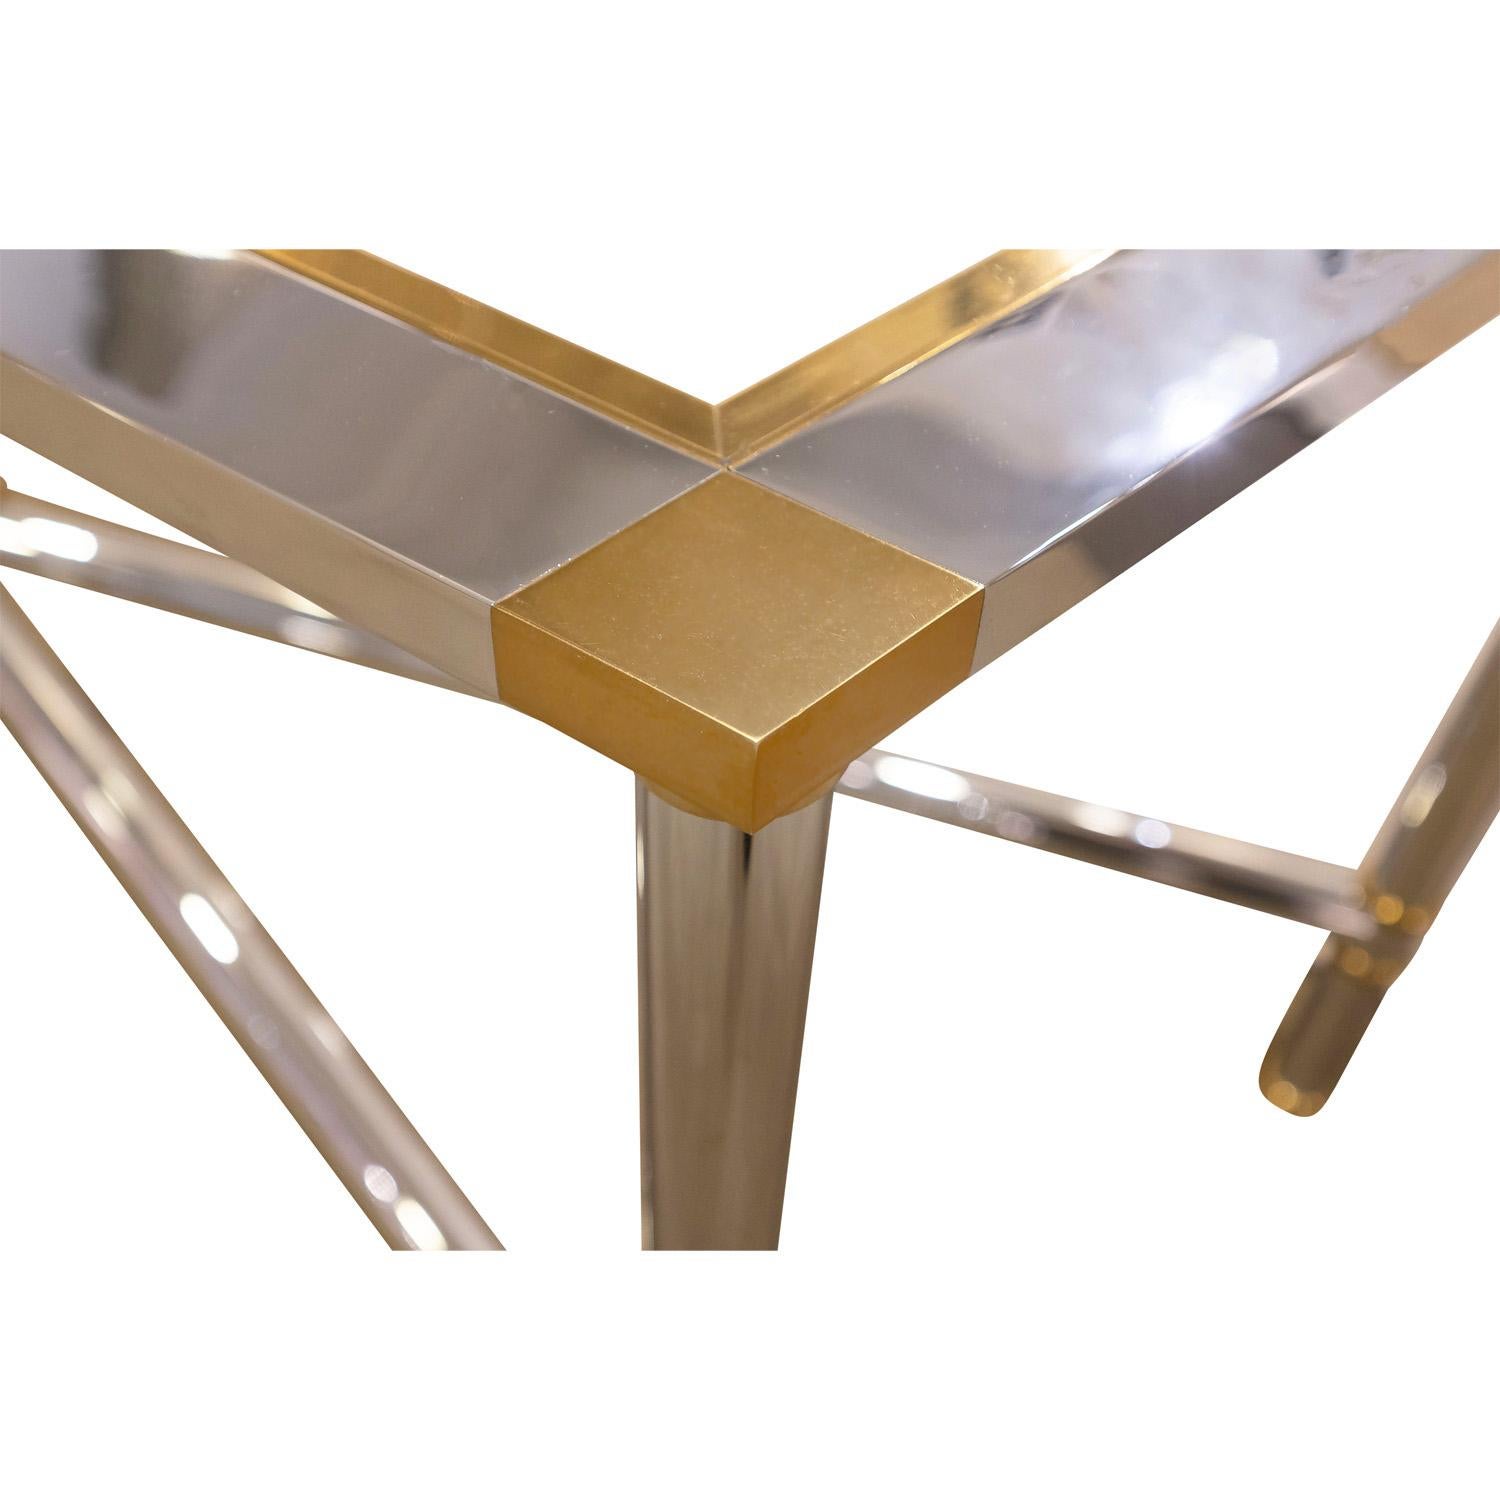 Karl Springer Rare Jansen Style Console Table in Polished Chrome and Brass 1980s In Excellent Condition For Sale In New York, NY